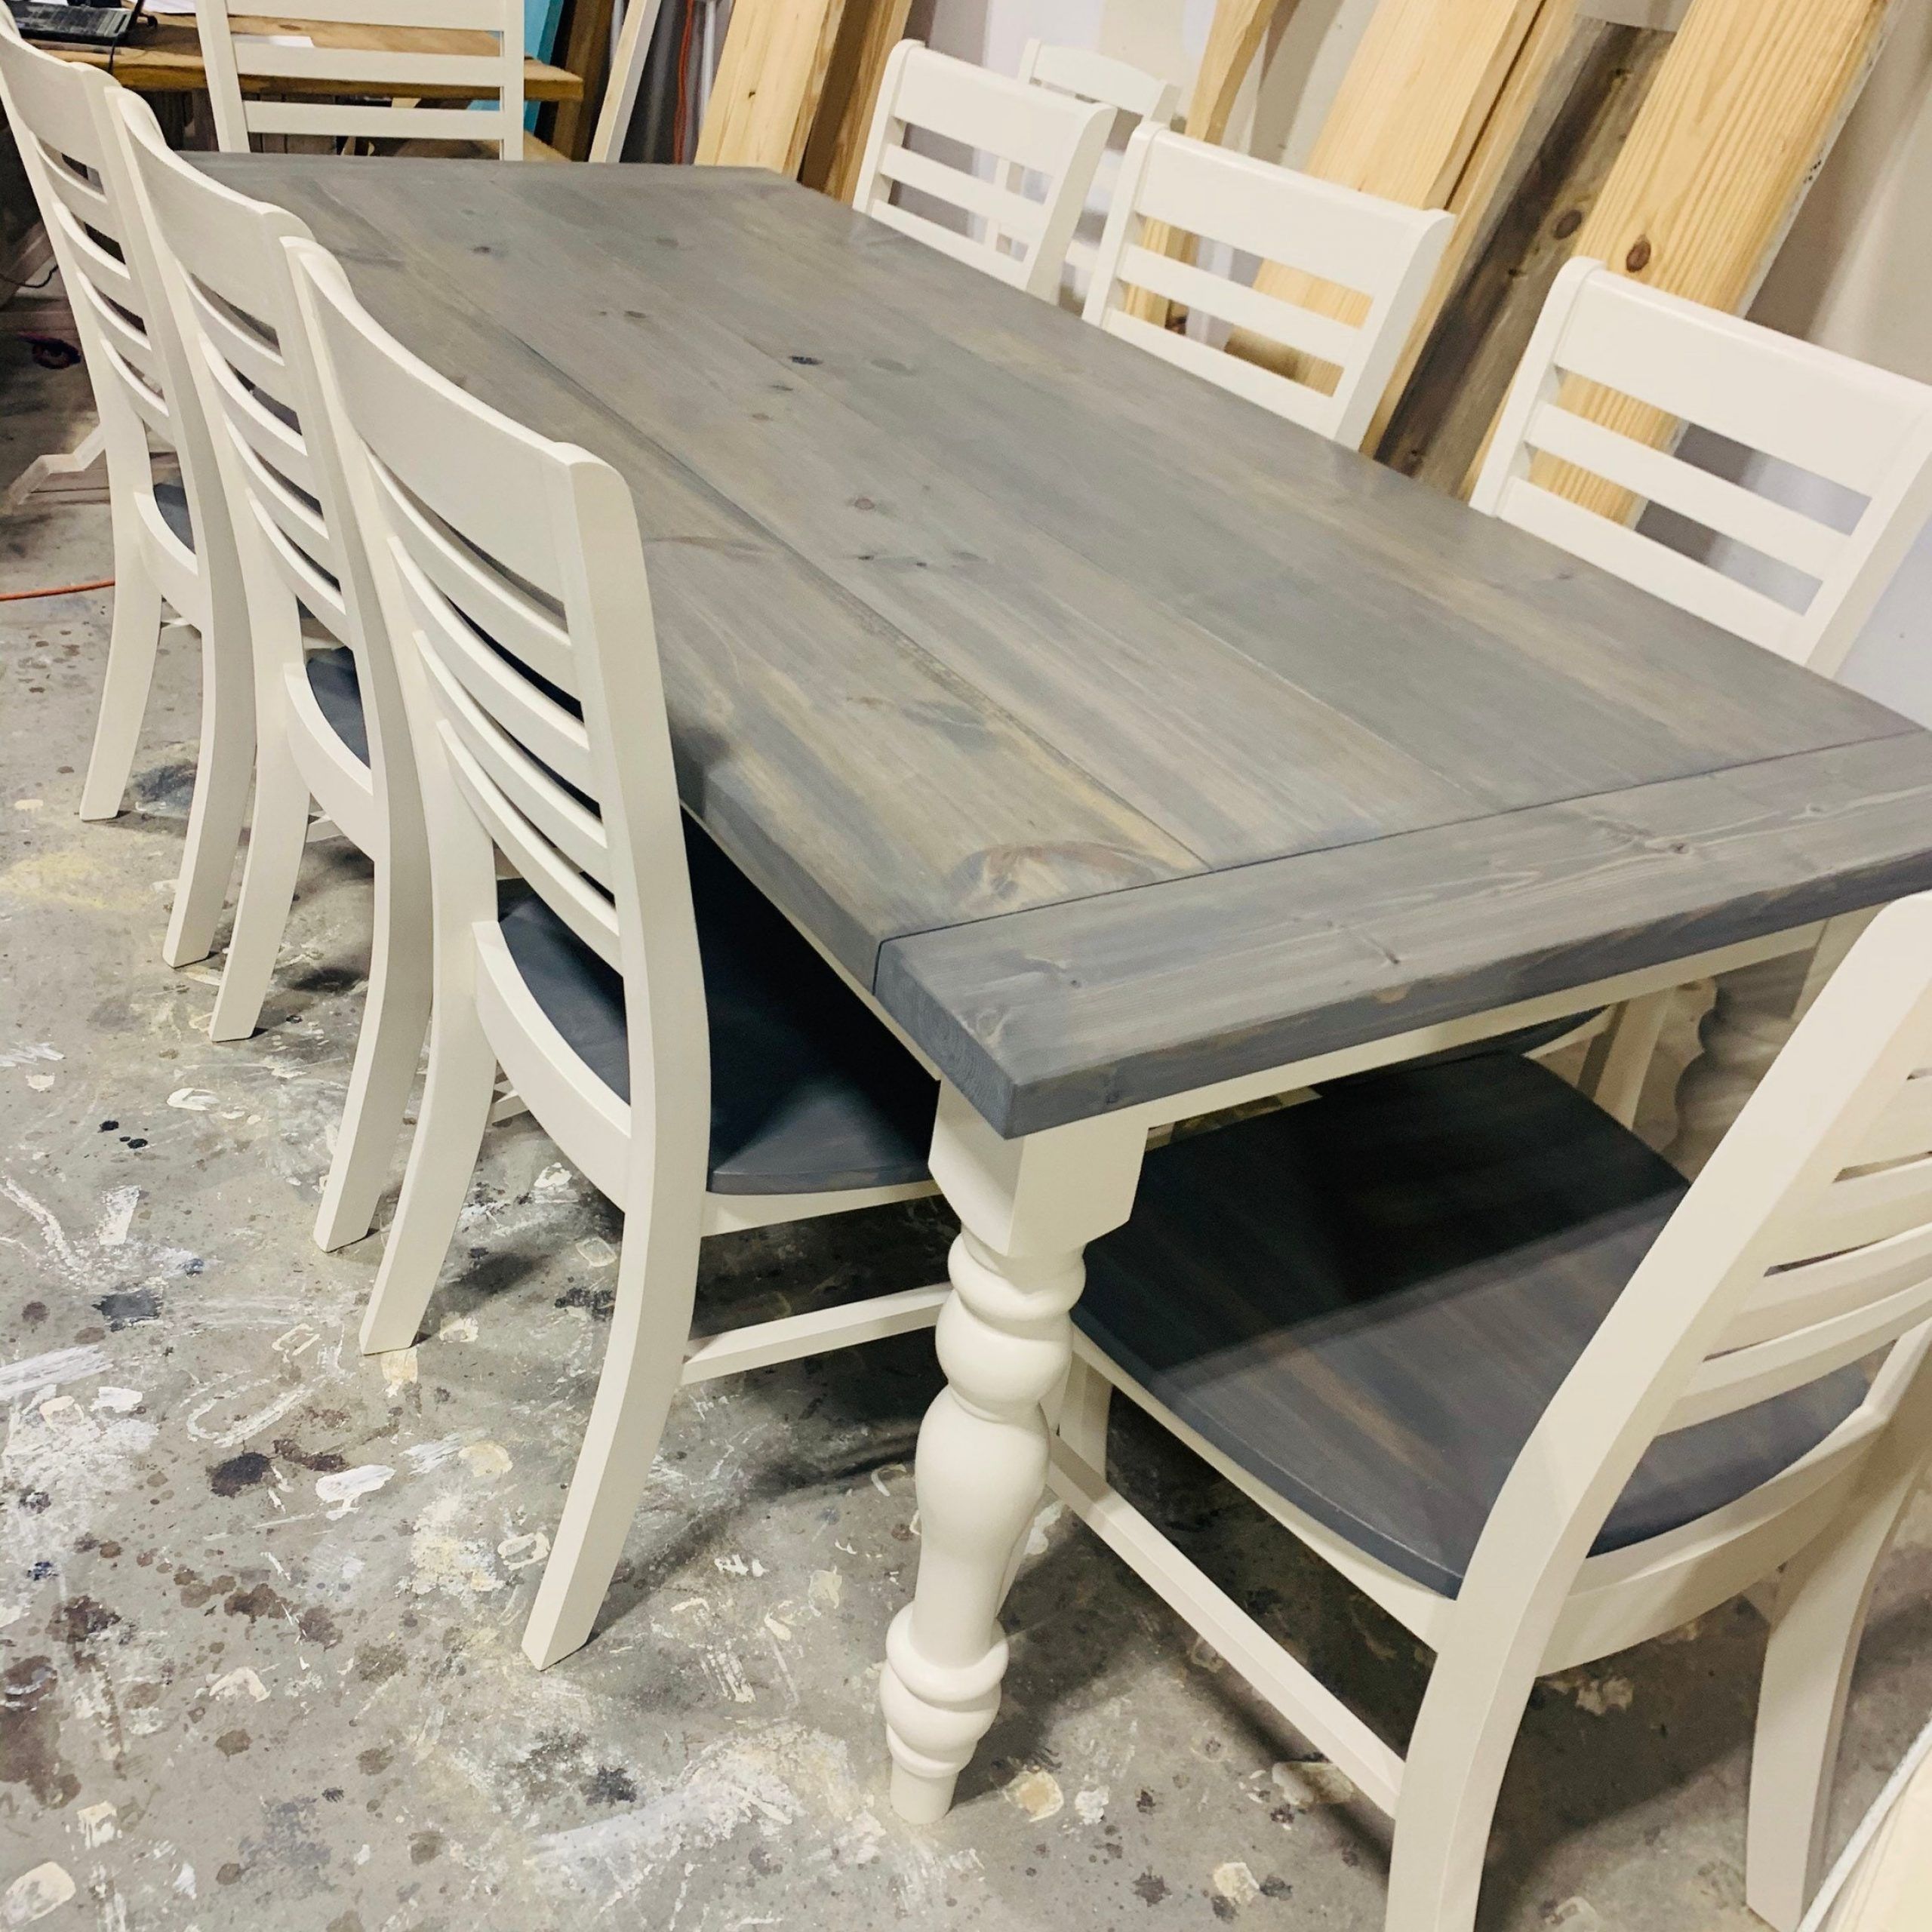 7Ft Rustic Farmhouse Table With Turned Legs, Chair Set Classic Gray Top With Regard To Black And Gray Outdoor Table And Chair Sets (View 15 of 15)